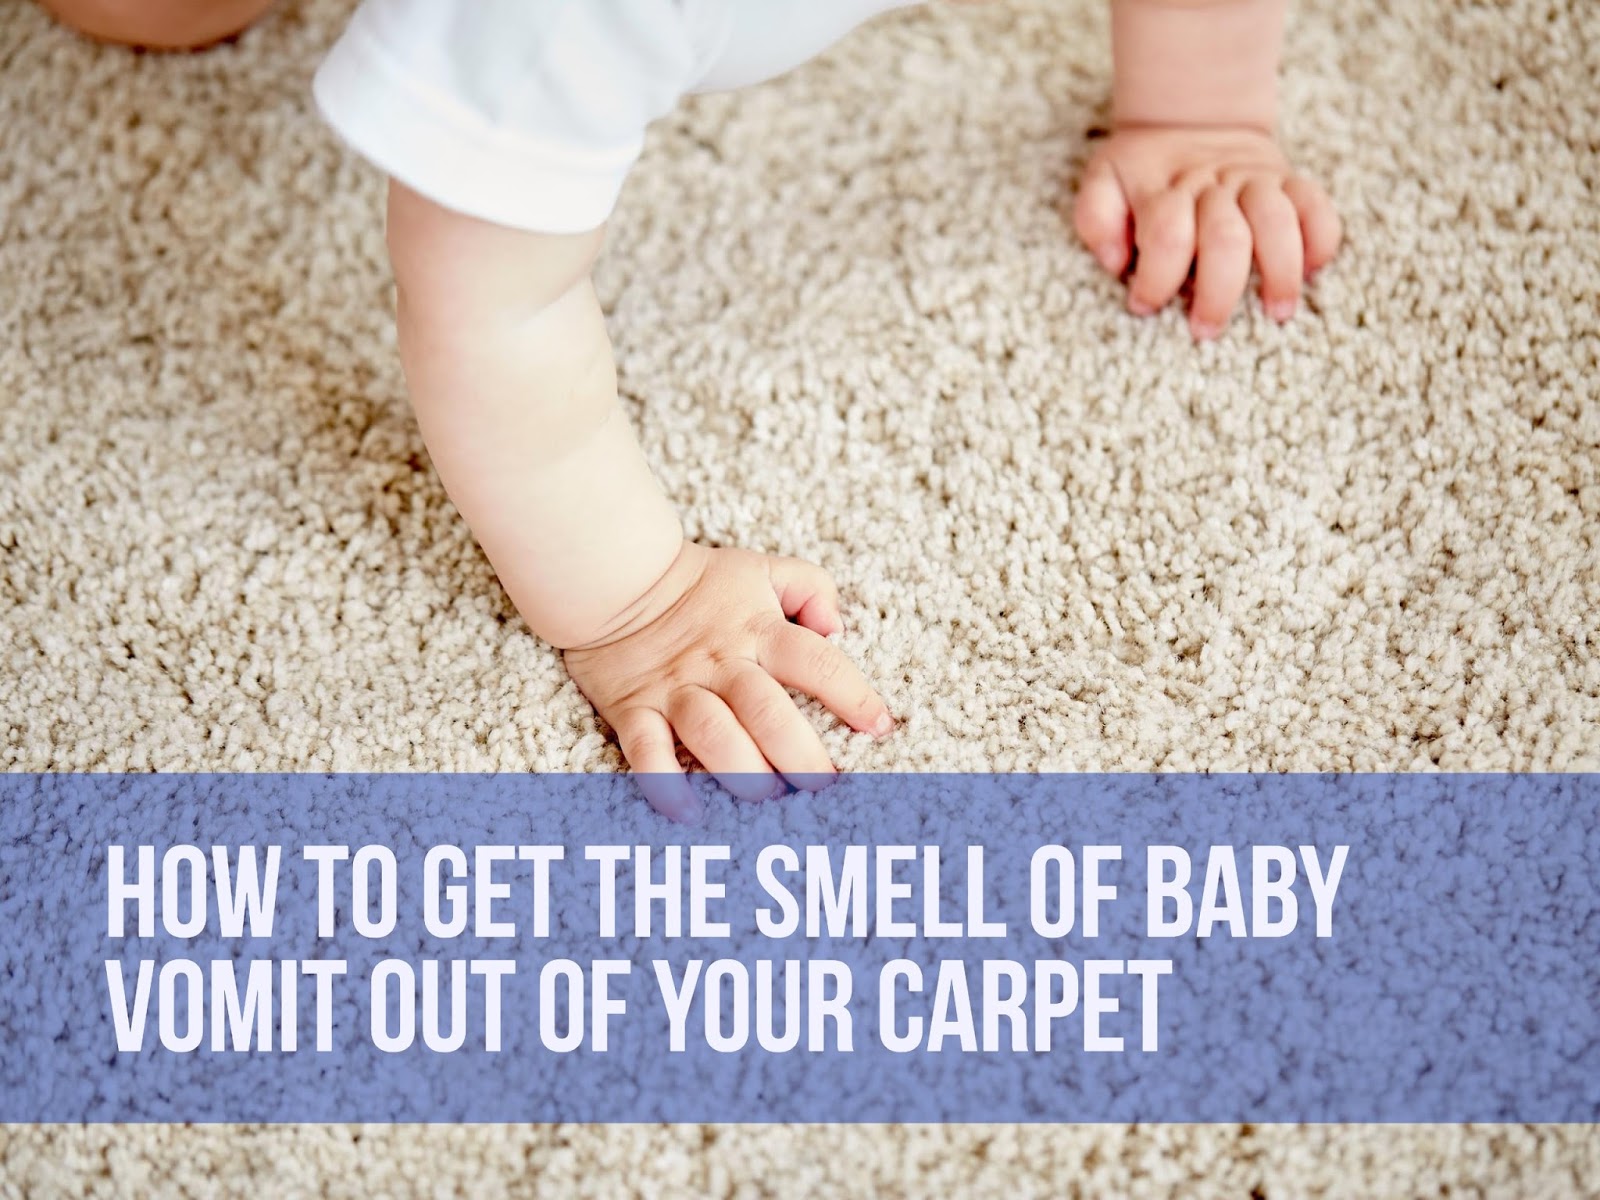 How to Get the Smell of Baby Vomit Out of Your Carpet